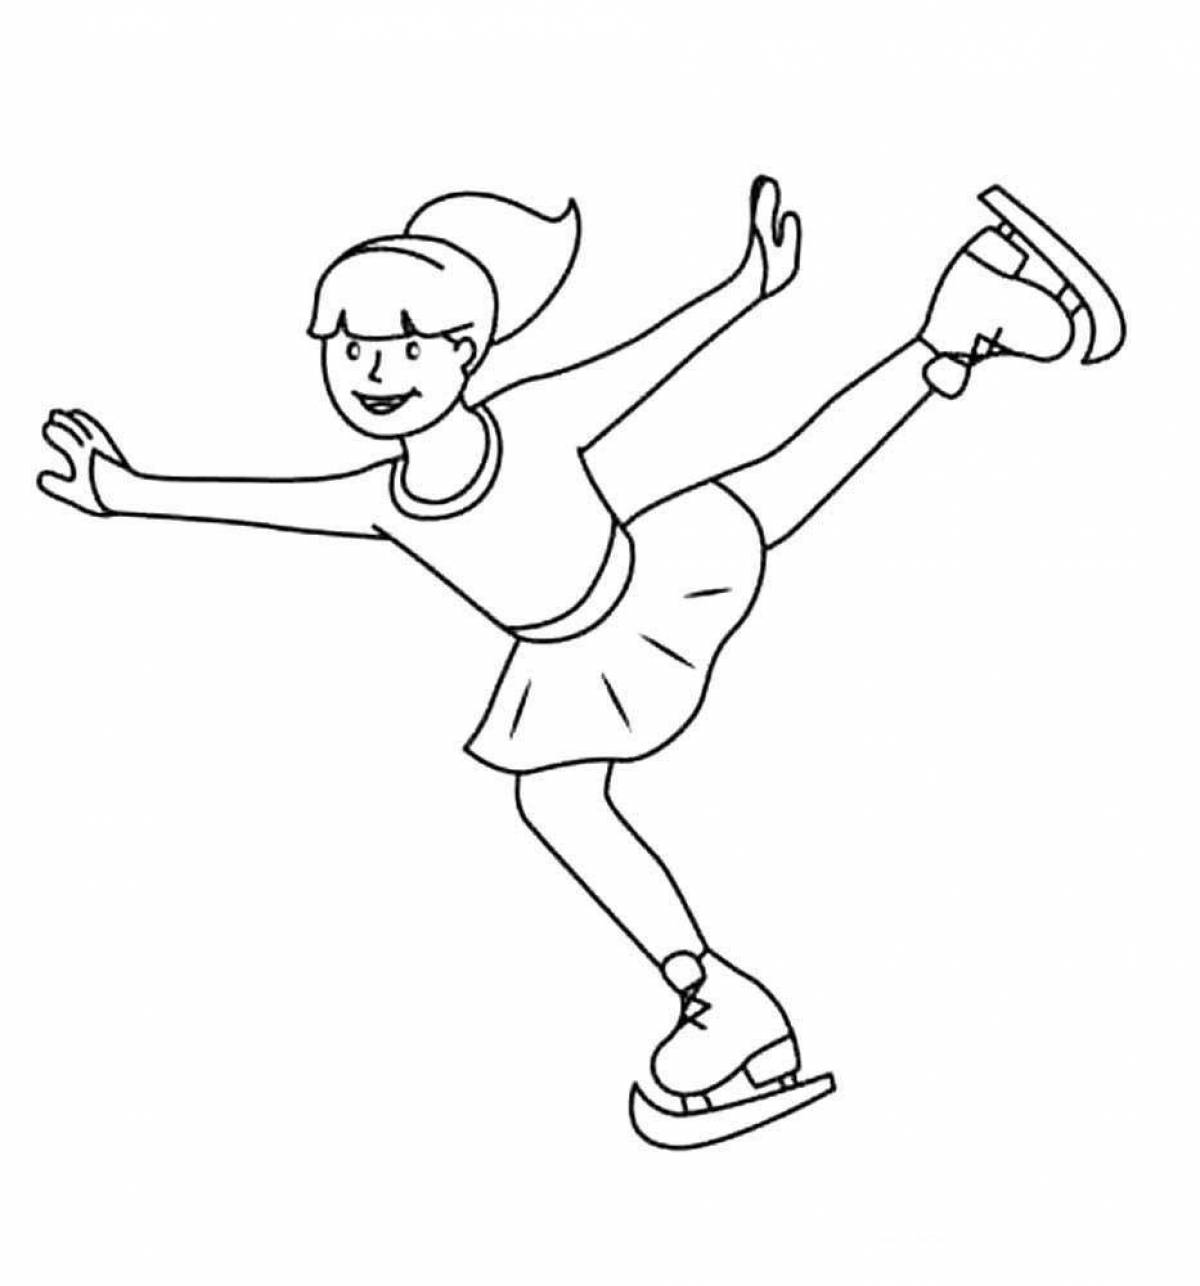 Exciting figure skating coloring book for kids